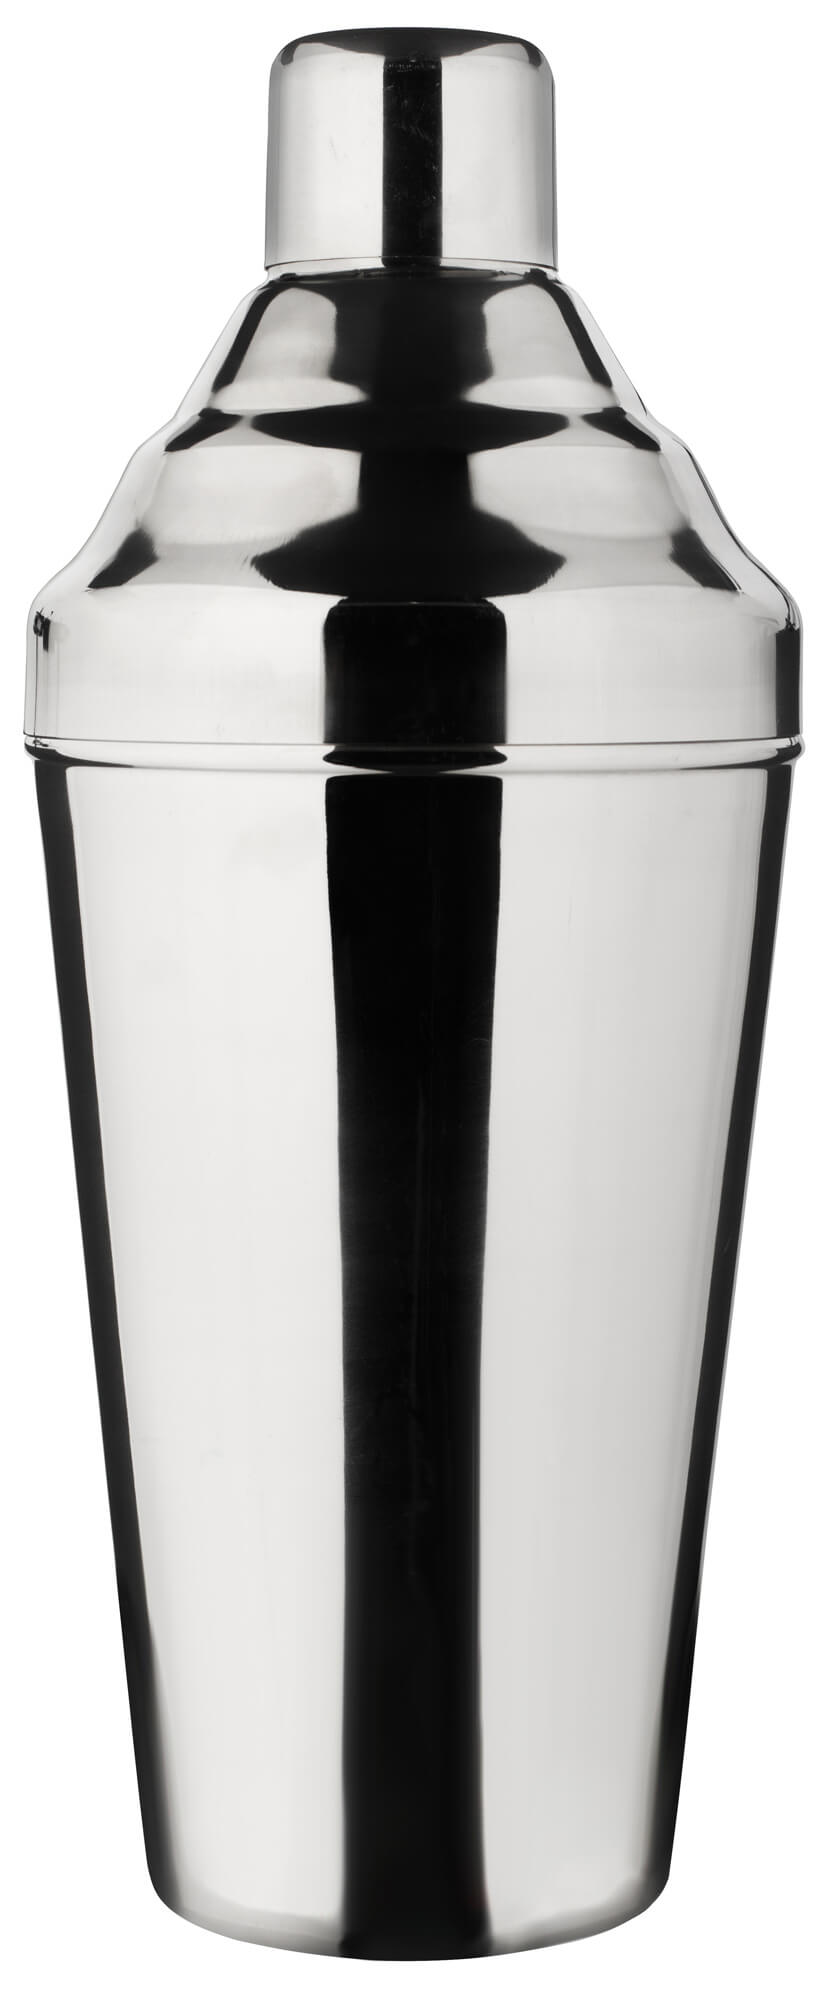 Cocktail shaker, stainless steel, tripartite, polished - 3800ml